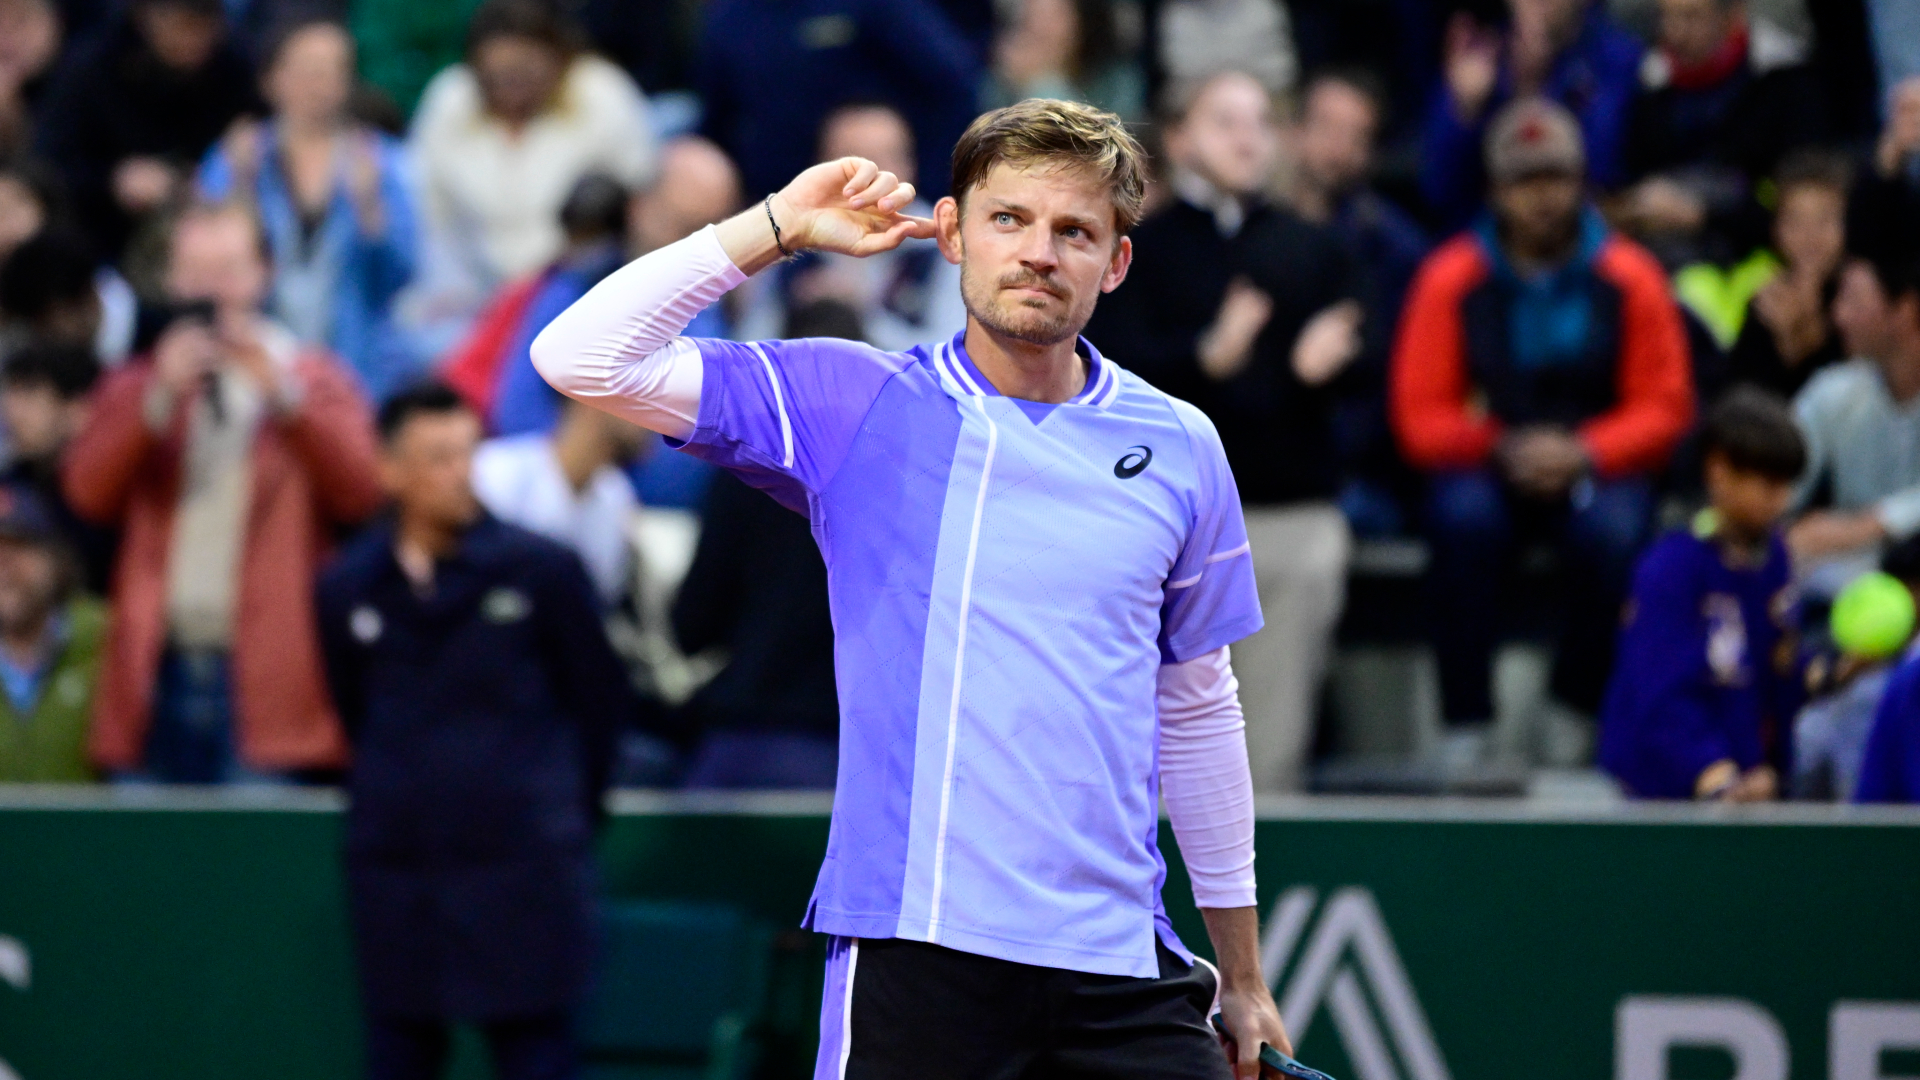 Goffin claims fan spat gum at him